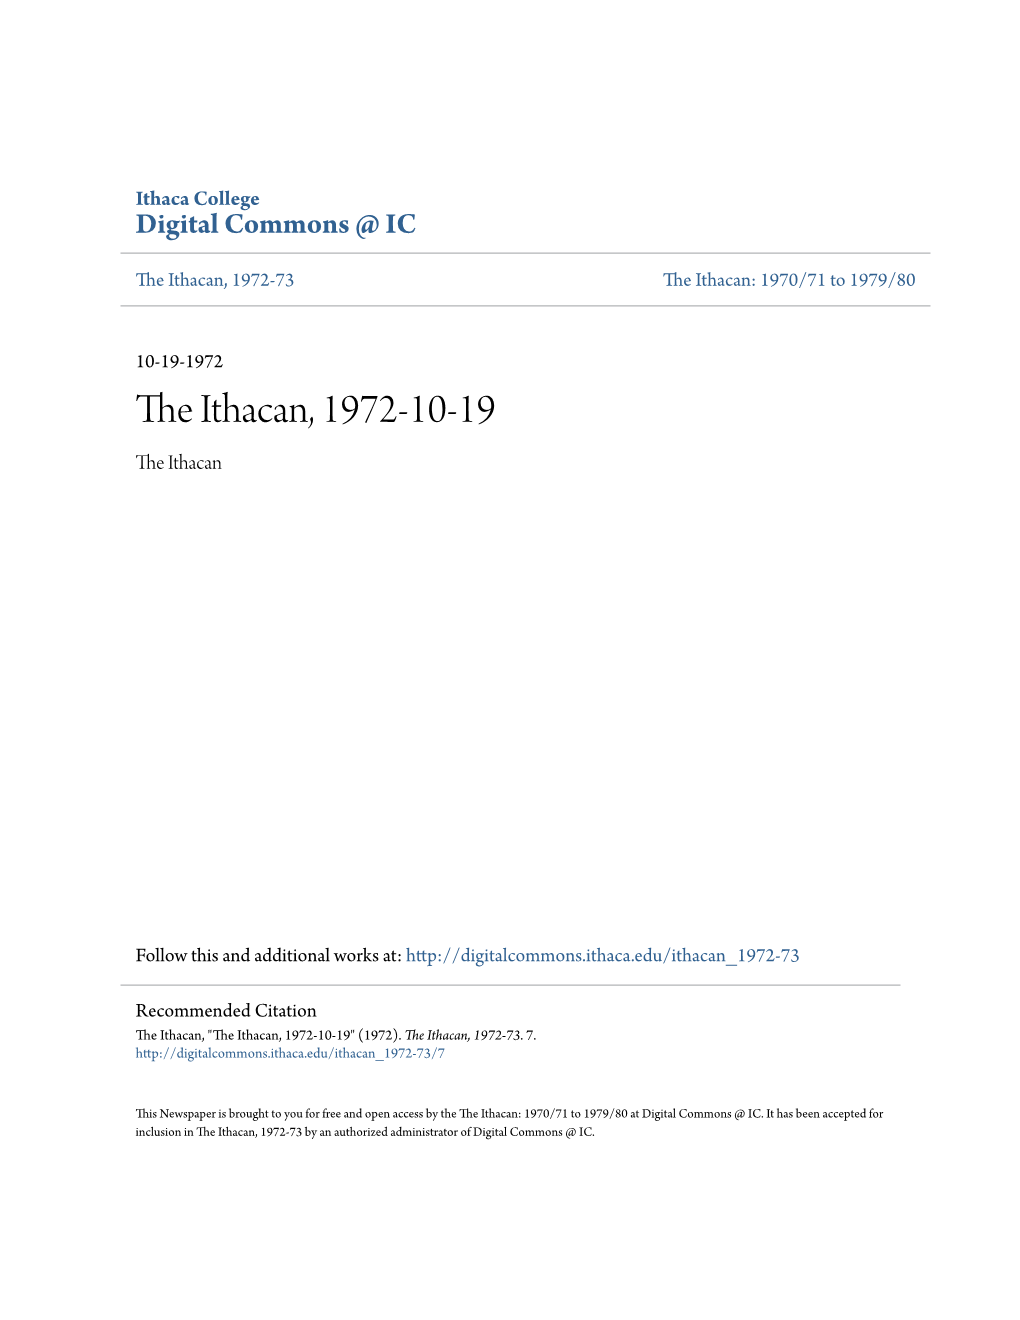 The Ithacan, 1972-10-19